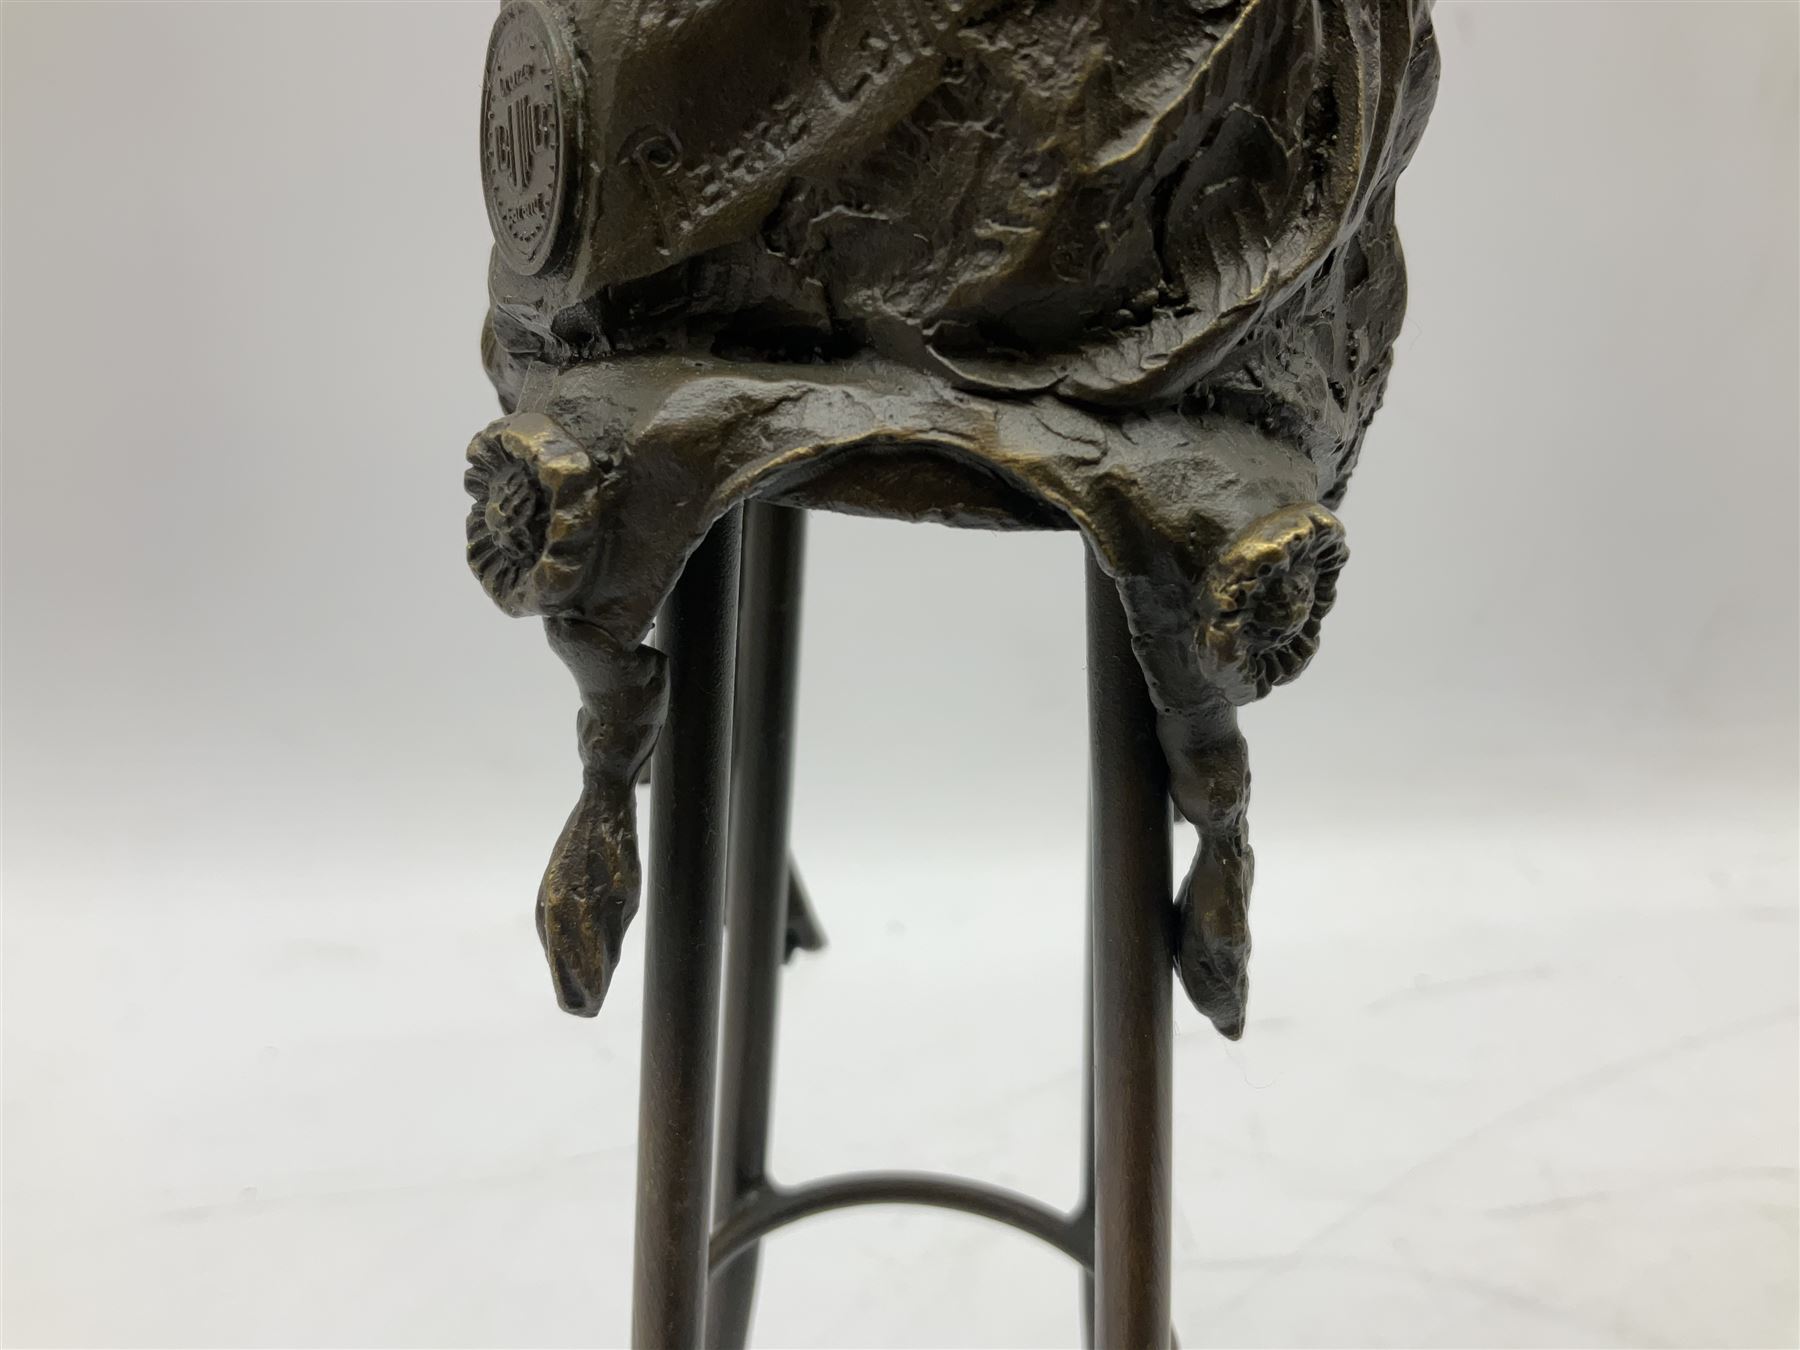 Art Deco style bronze modelled as a female figure with knee raised - Image 8 of 12